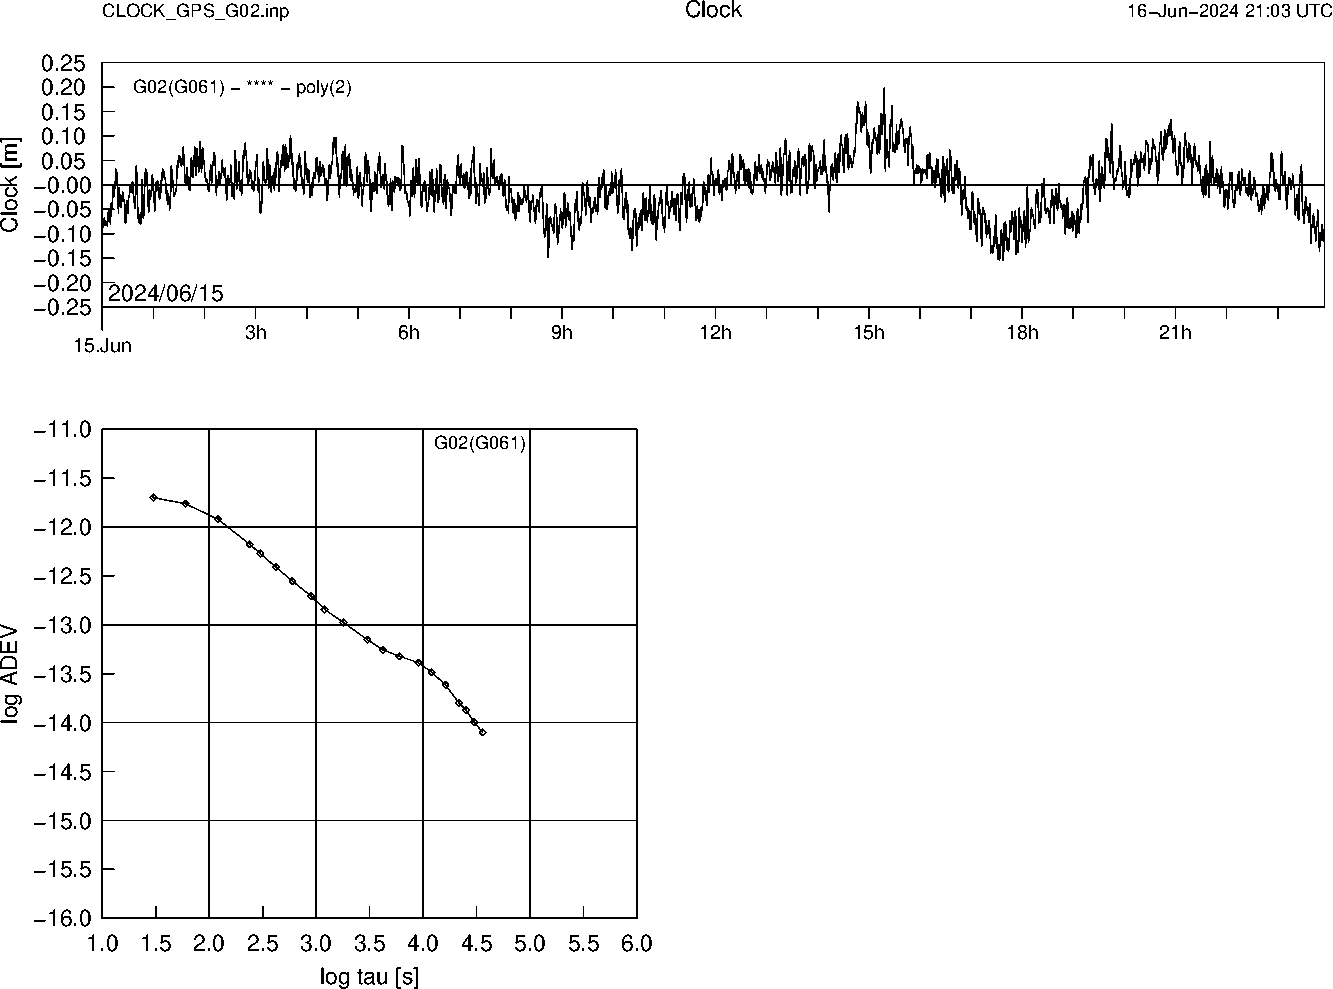 GPS G02 Clock Time Series and Allan Deviation